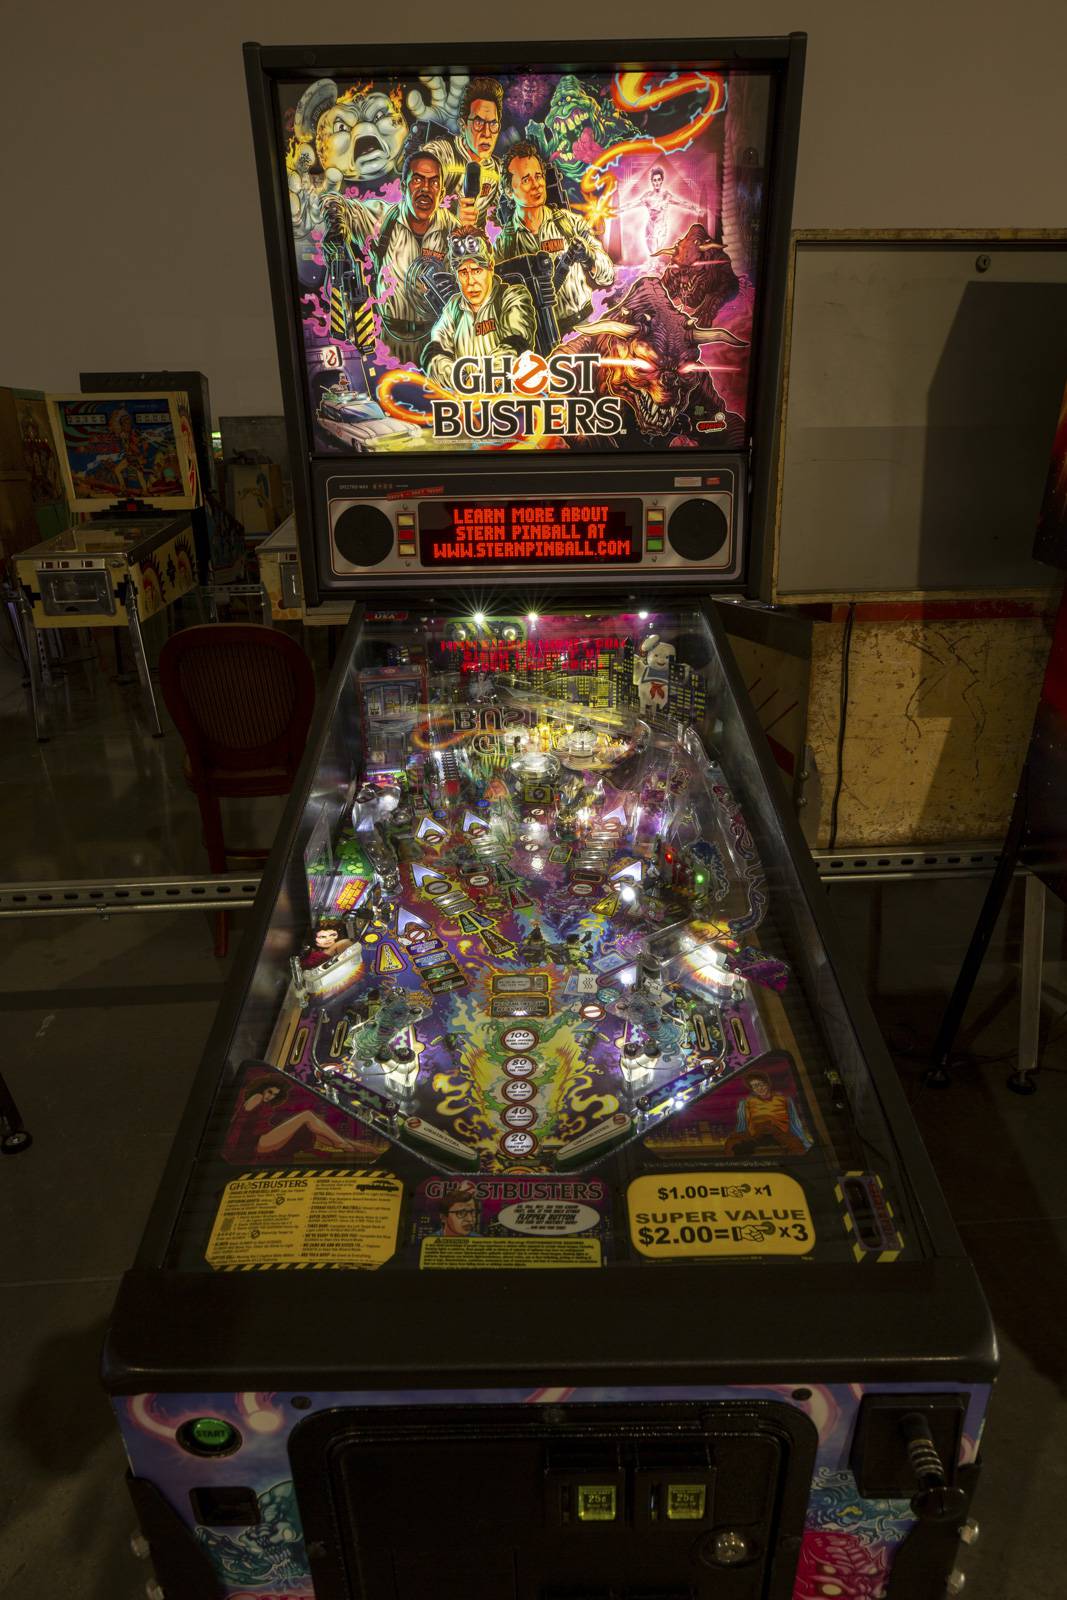 The Pinball Hall of Fame makes a bold move to the Las Vegas Strip